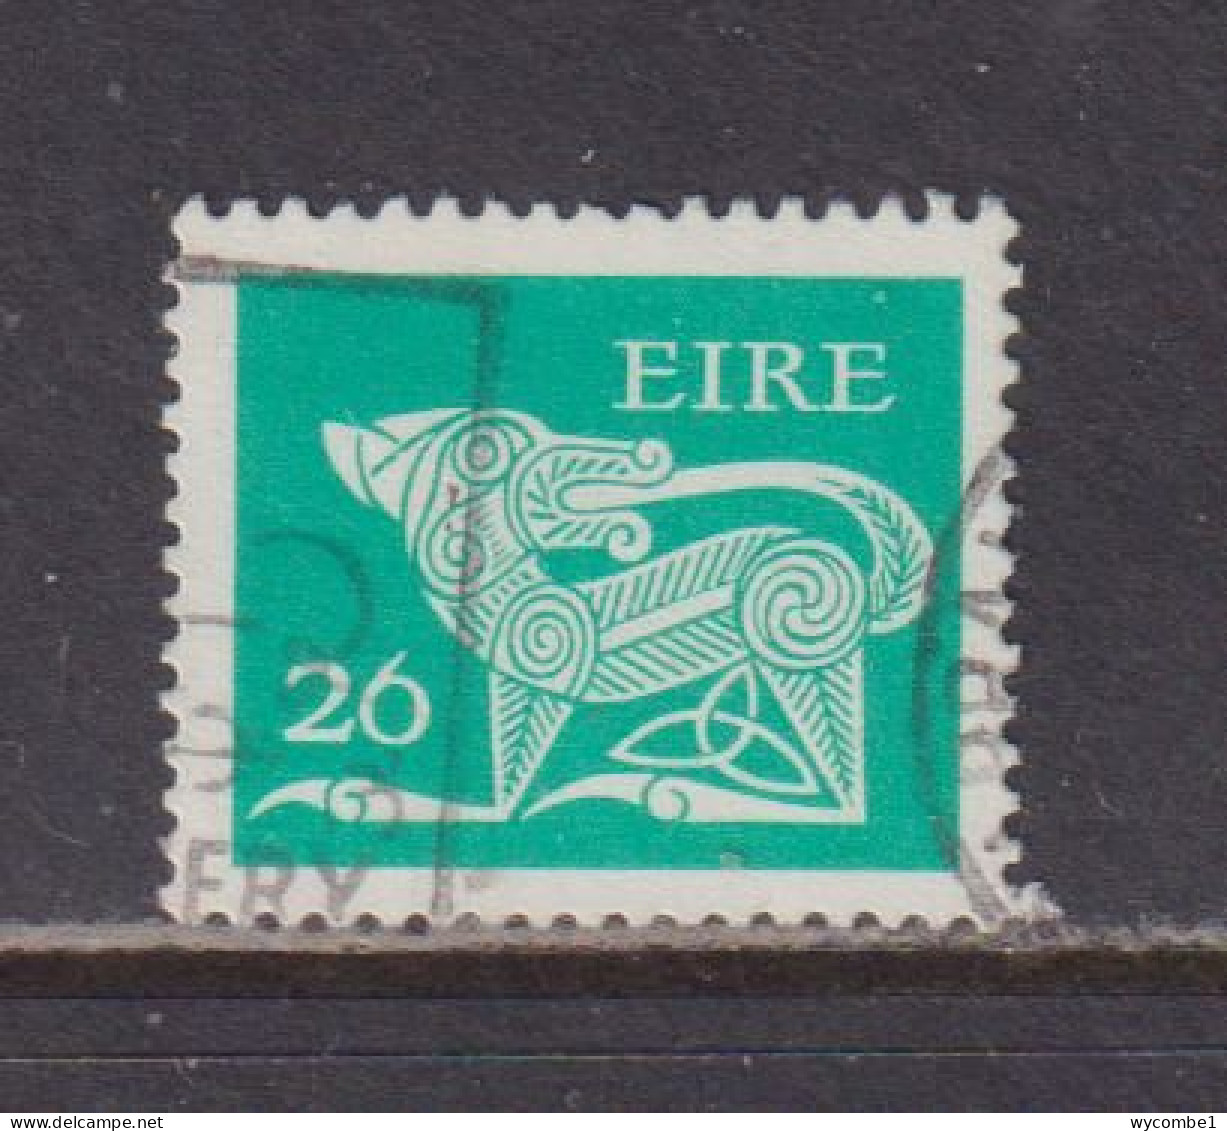 IRELAND - 1971  Decimal Currency Definitives  26p  Used As Scan - Usati